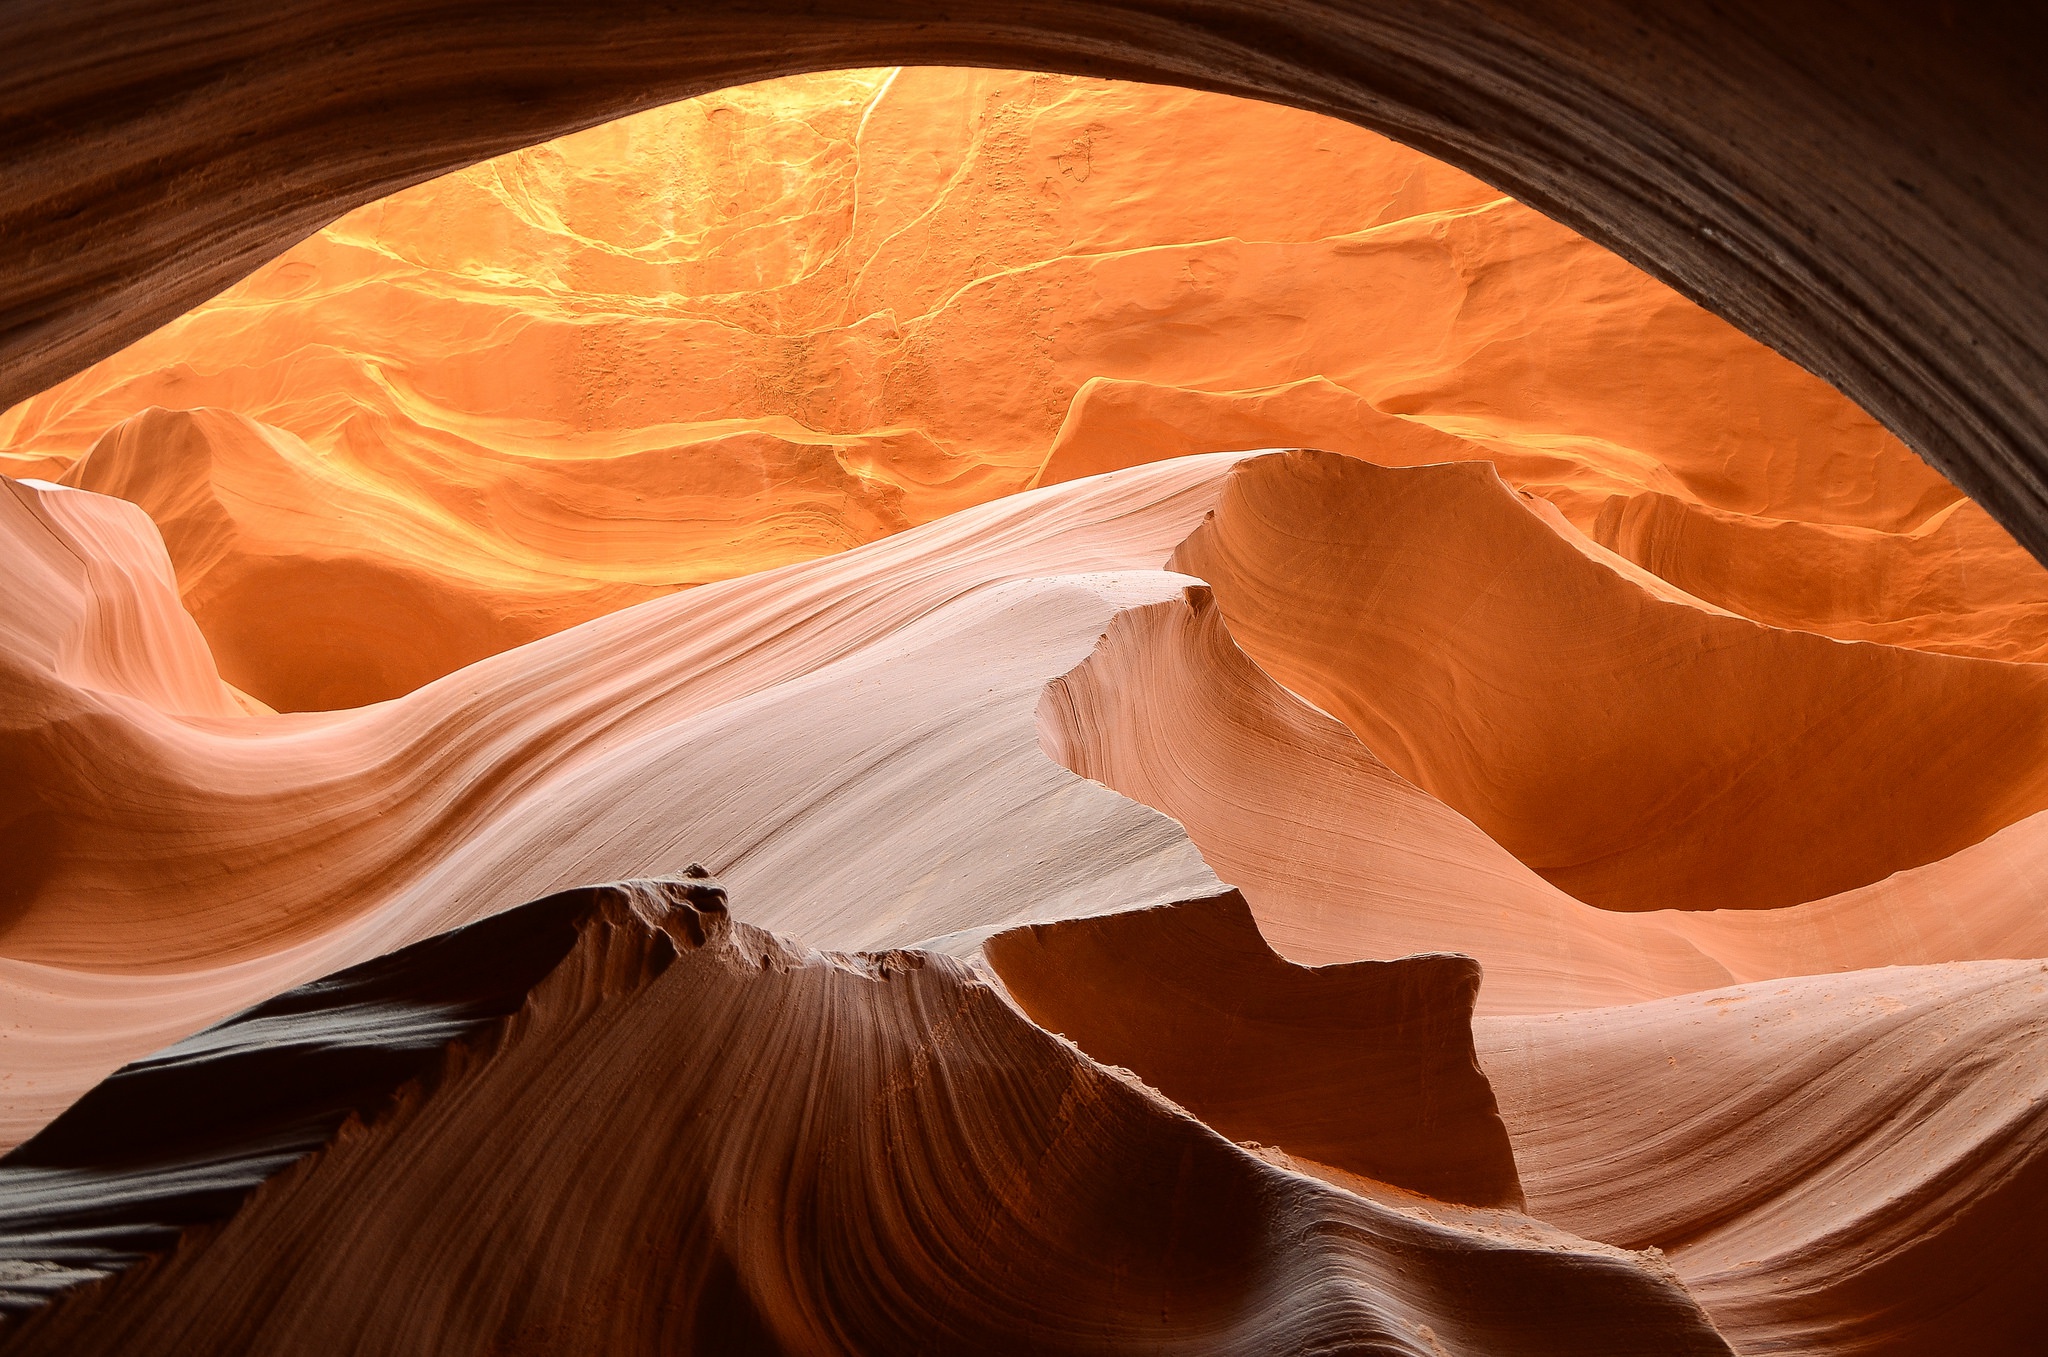  Antelope Canyon HQ Background Images